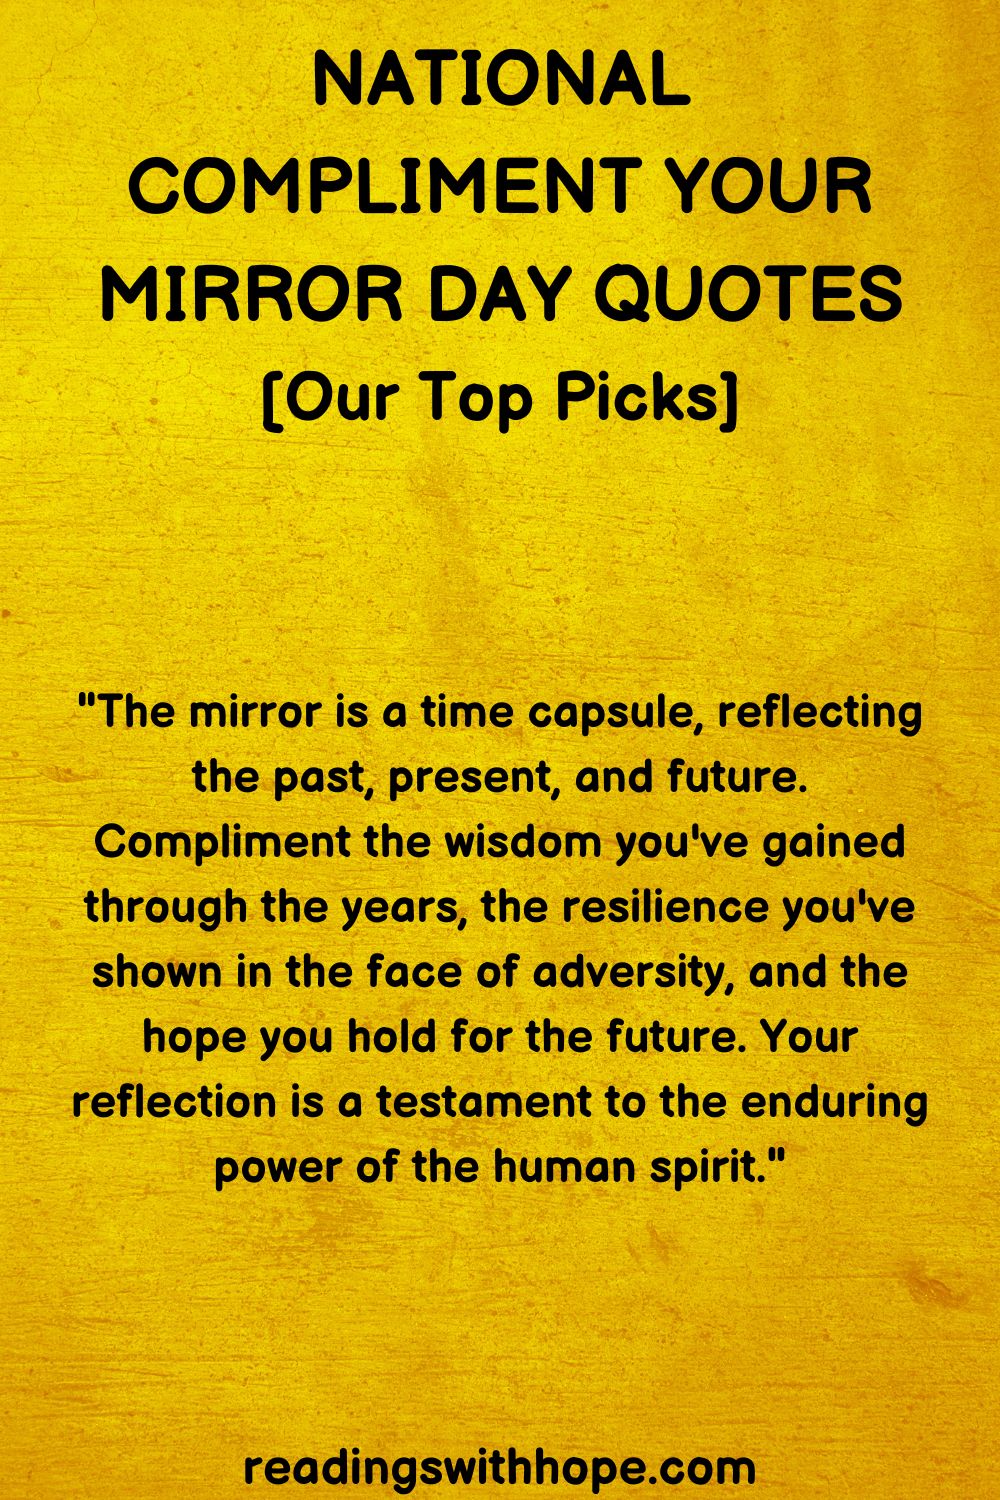 40 National Compliment Your Mirror Day Quotes, Messages and Wishes